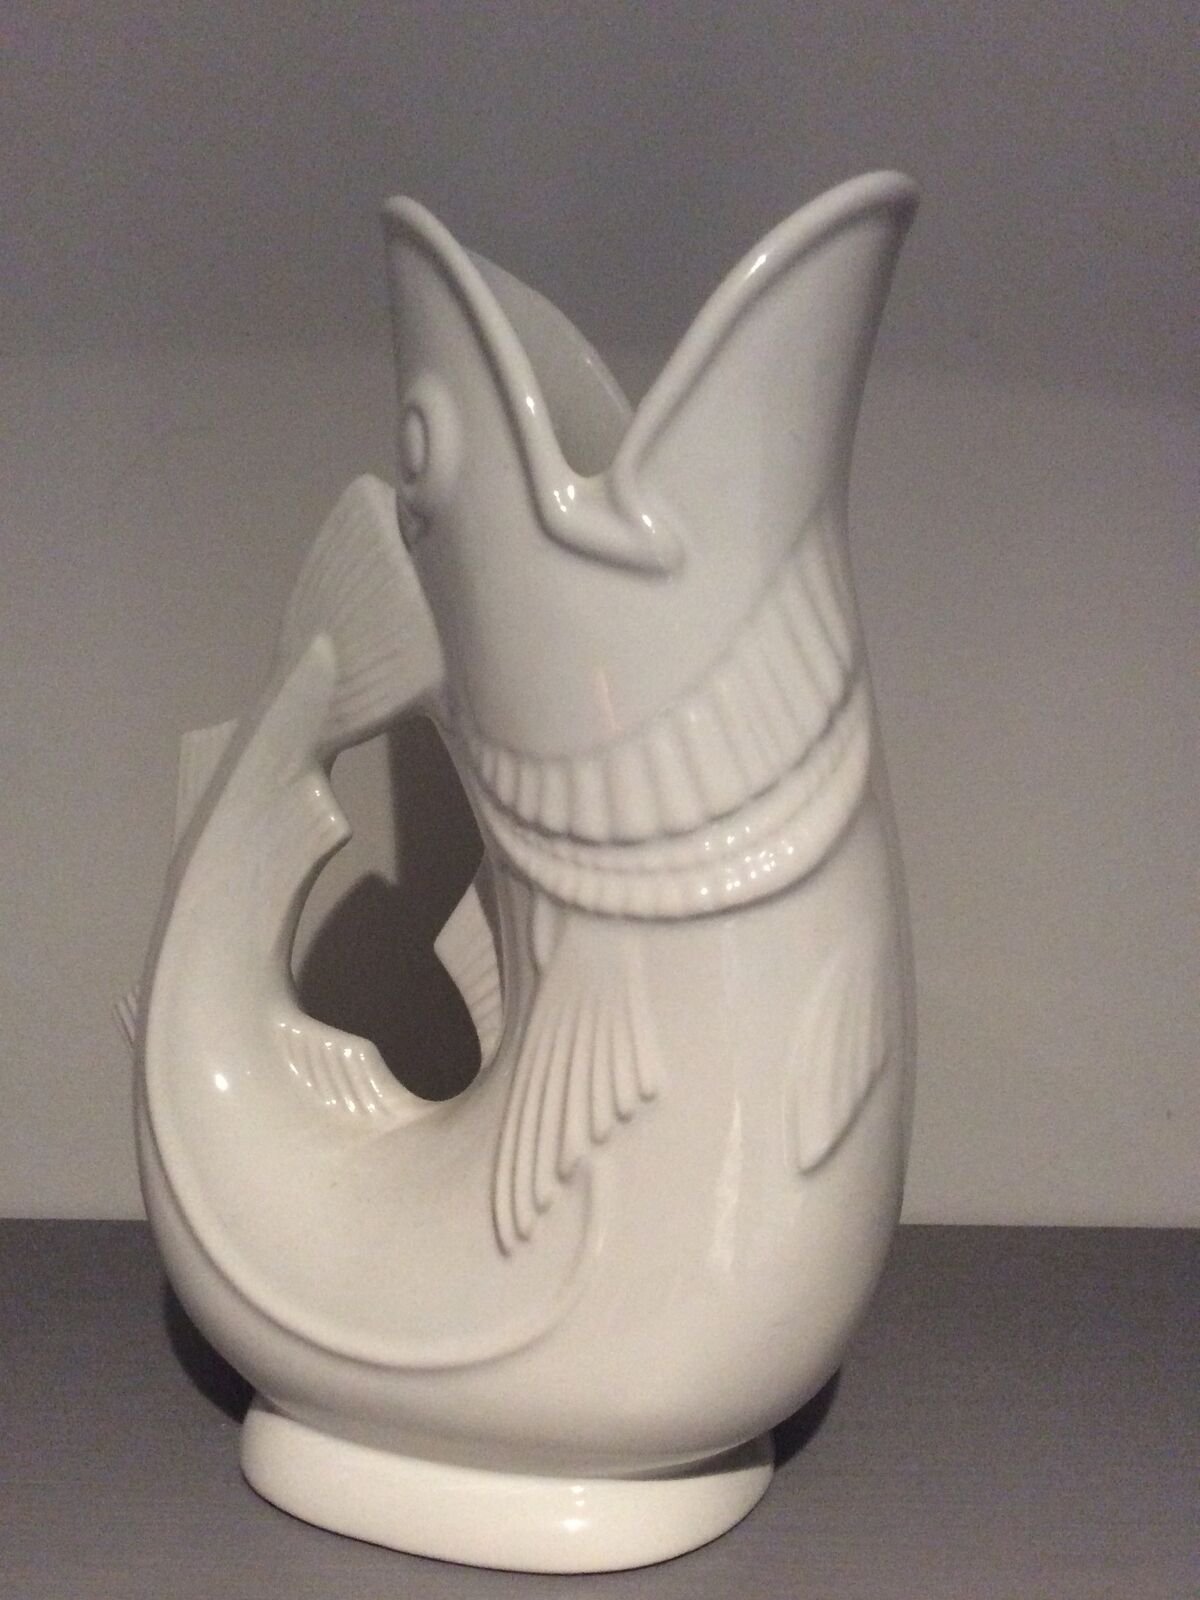 Gurgling Cod Fish Pitcher White 10 in Authentic Shreve Crump & Low  | eBay | eBay US